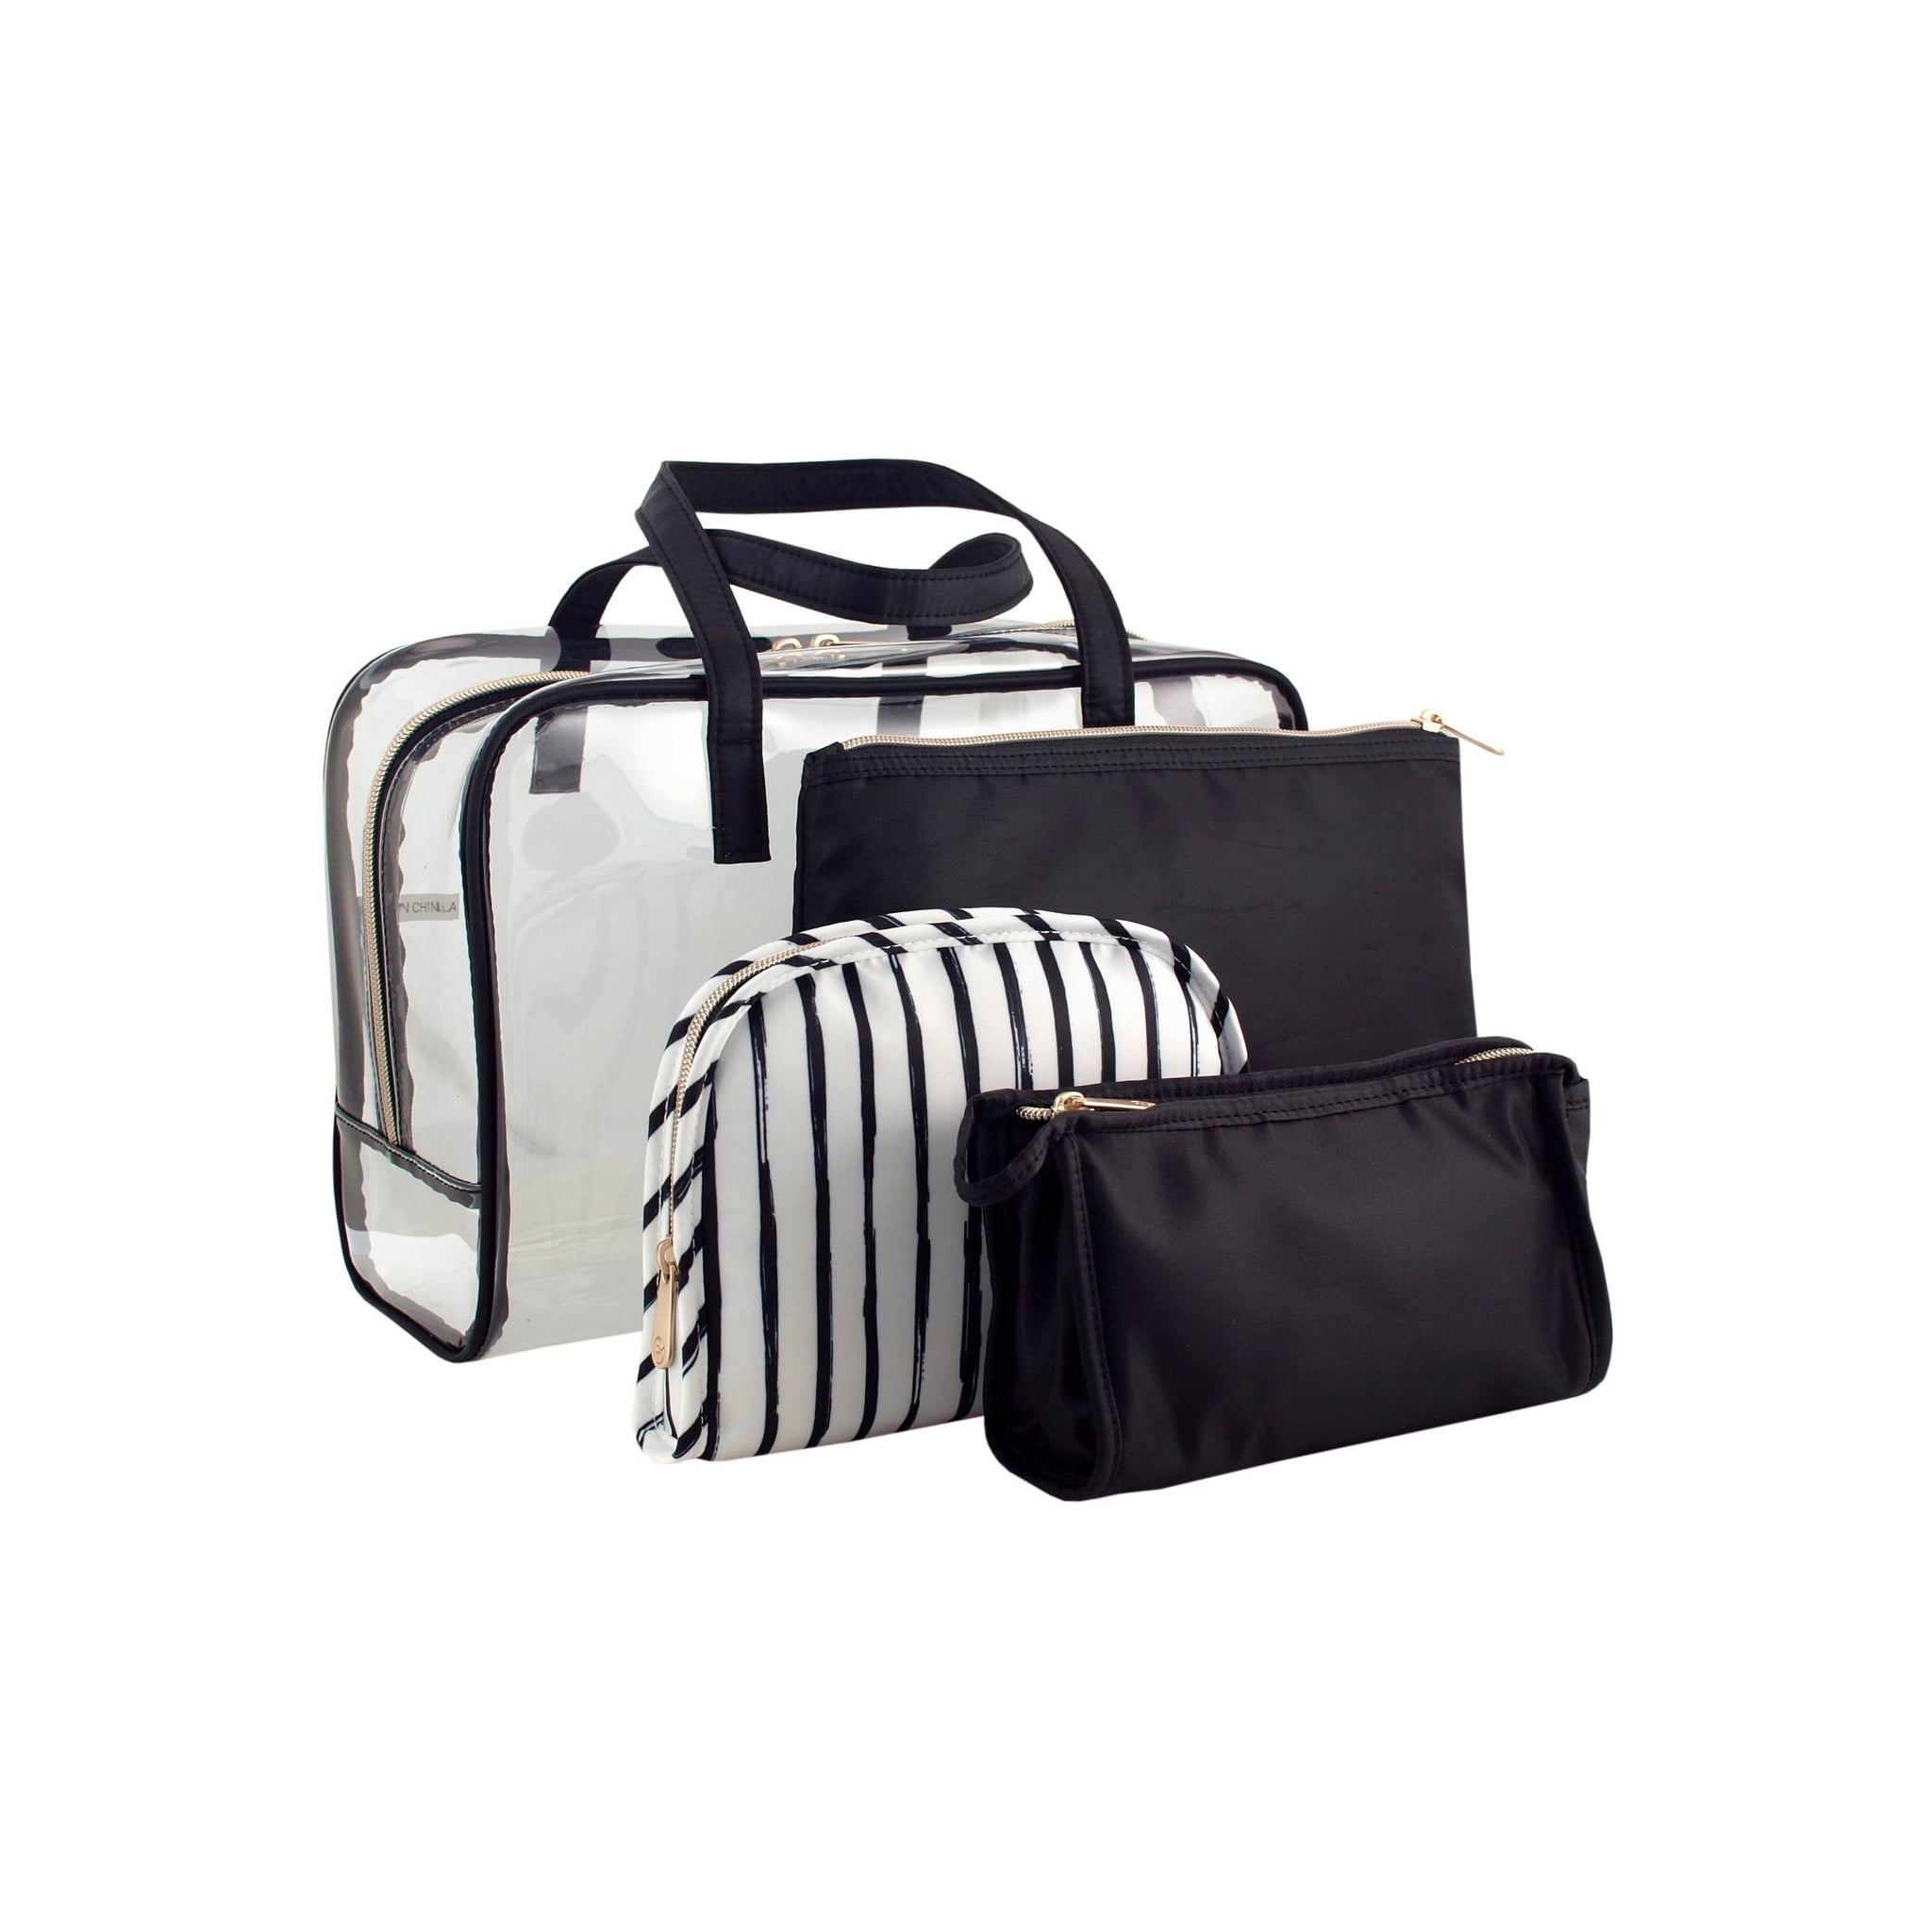 <p><a href="https://www.target.com/p/sonia-kashuk-8482-makeup-organizer-bag-set-black-stripe/-/A-52702584#lnk=sametab">BUY NOW</a></p><p>$35</p><p><a href="https://www.target.com/p/sonia-kashuk-8482-makeup-organizer-bag-set-black-stripe/-/A-52702584#lnk=sametab" class="ga-track">Sonia Kashuk Makeup Organizer Bag Set</a> ($35)</p> <p>If organization is your biggest priority when traveling, the Sonia Kashuk Makeup Organizer Bag Set has everything you need to make your life easier. This bag set comes with a large clear weekender bag, a large zip pouch, a pencil case bag, and a round-top pouch. You can use each of the pouches to store by look, routine, or product type or size. Plus, they all fit into the larger clear weekender bag. All of them are equipped with zippers to keep each product safe and secure.</p>